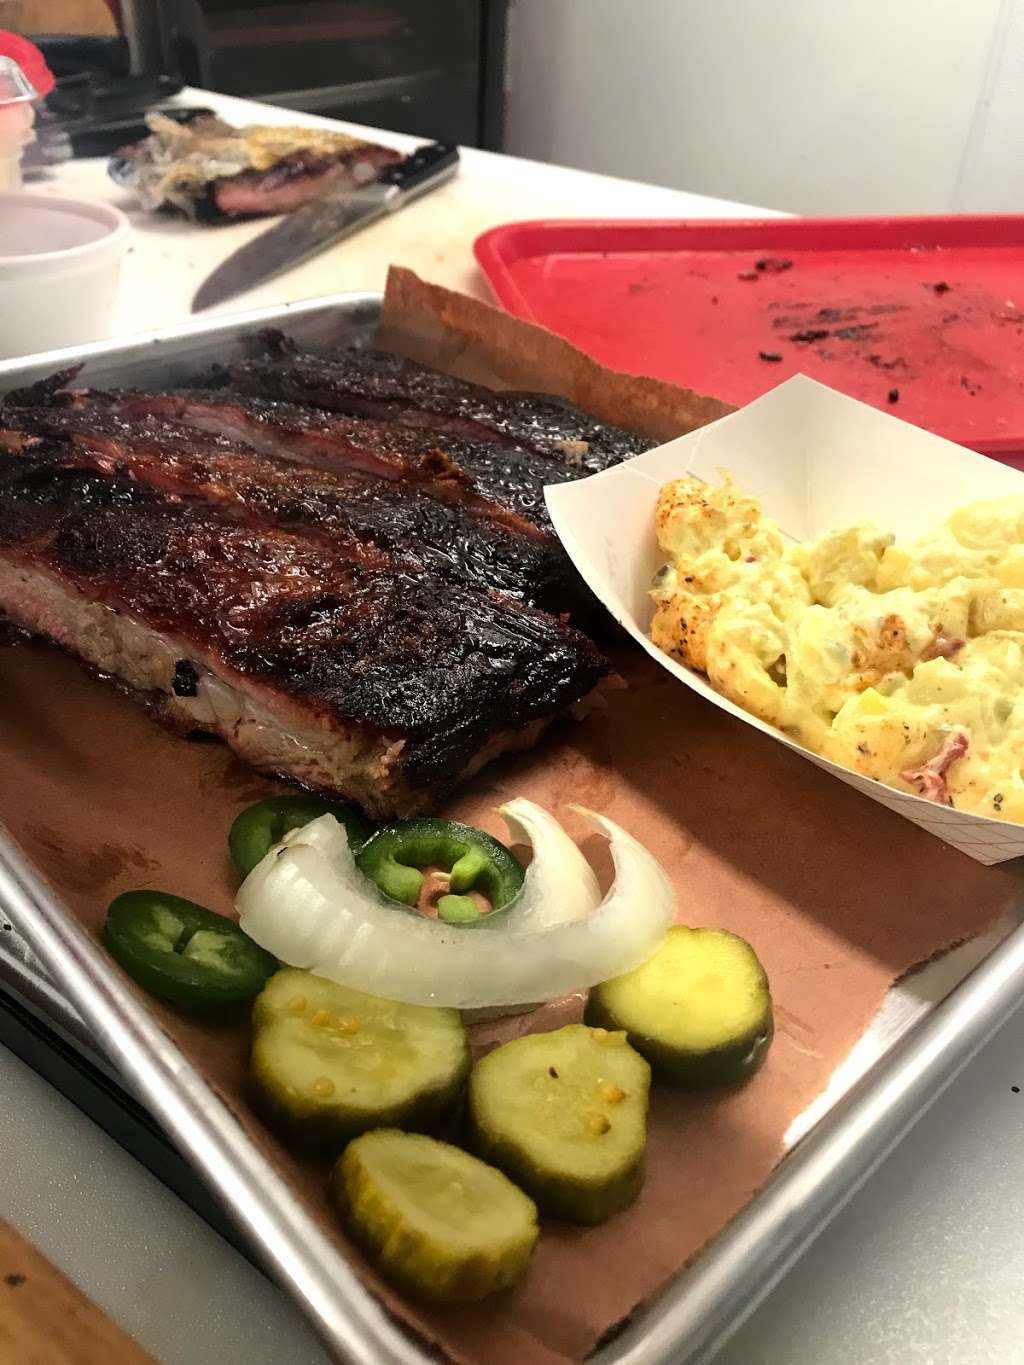 the rusty buckle bbq company | 22664 Community Dr, New Caney, TX 77357 | Phone: (281) 354-0447